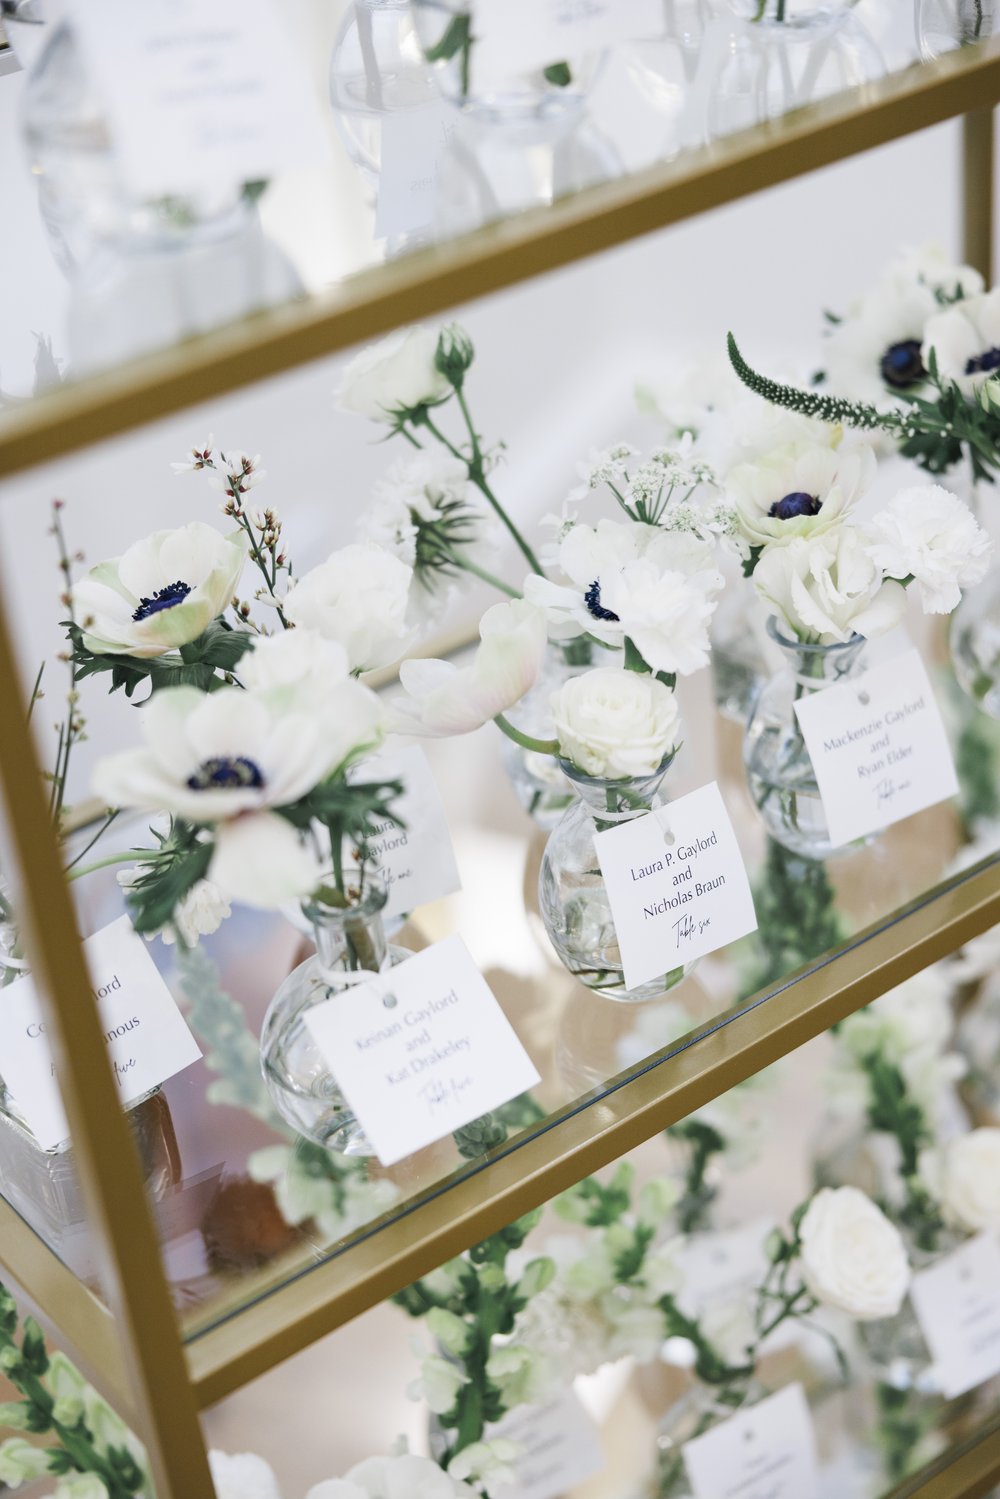  Floral arrangements for the wedding day with notecards by Professional Savanna Richardson Photography. wedding details floral #SavannaRichardsonPhotography #SavannaRichardsonWeddings #NYEwedding #magicalwedding #snowywedding #holidaywedding #married